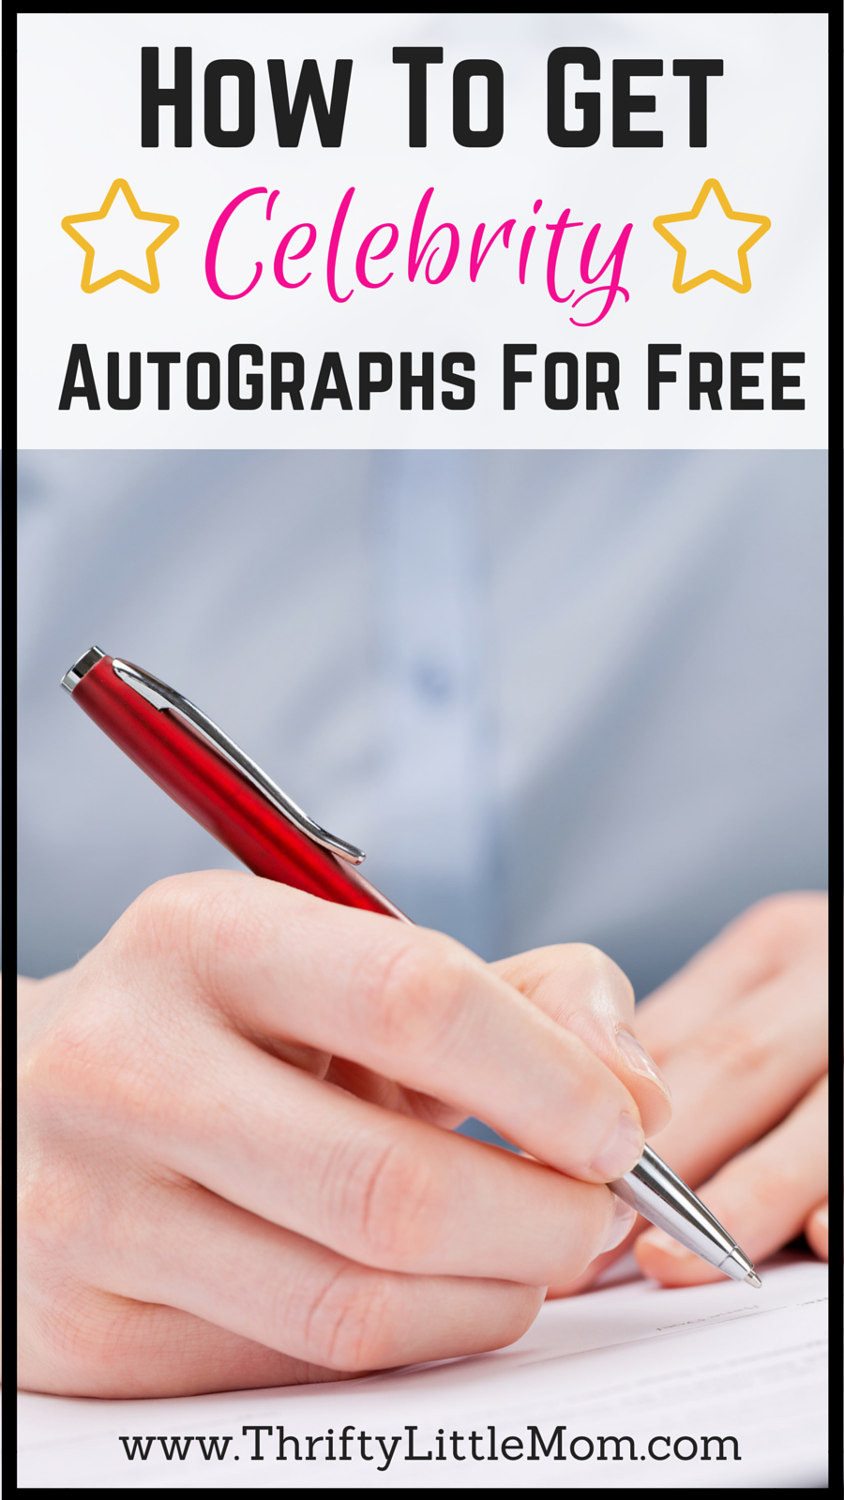 How To Get Celebrity Autographs for free